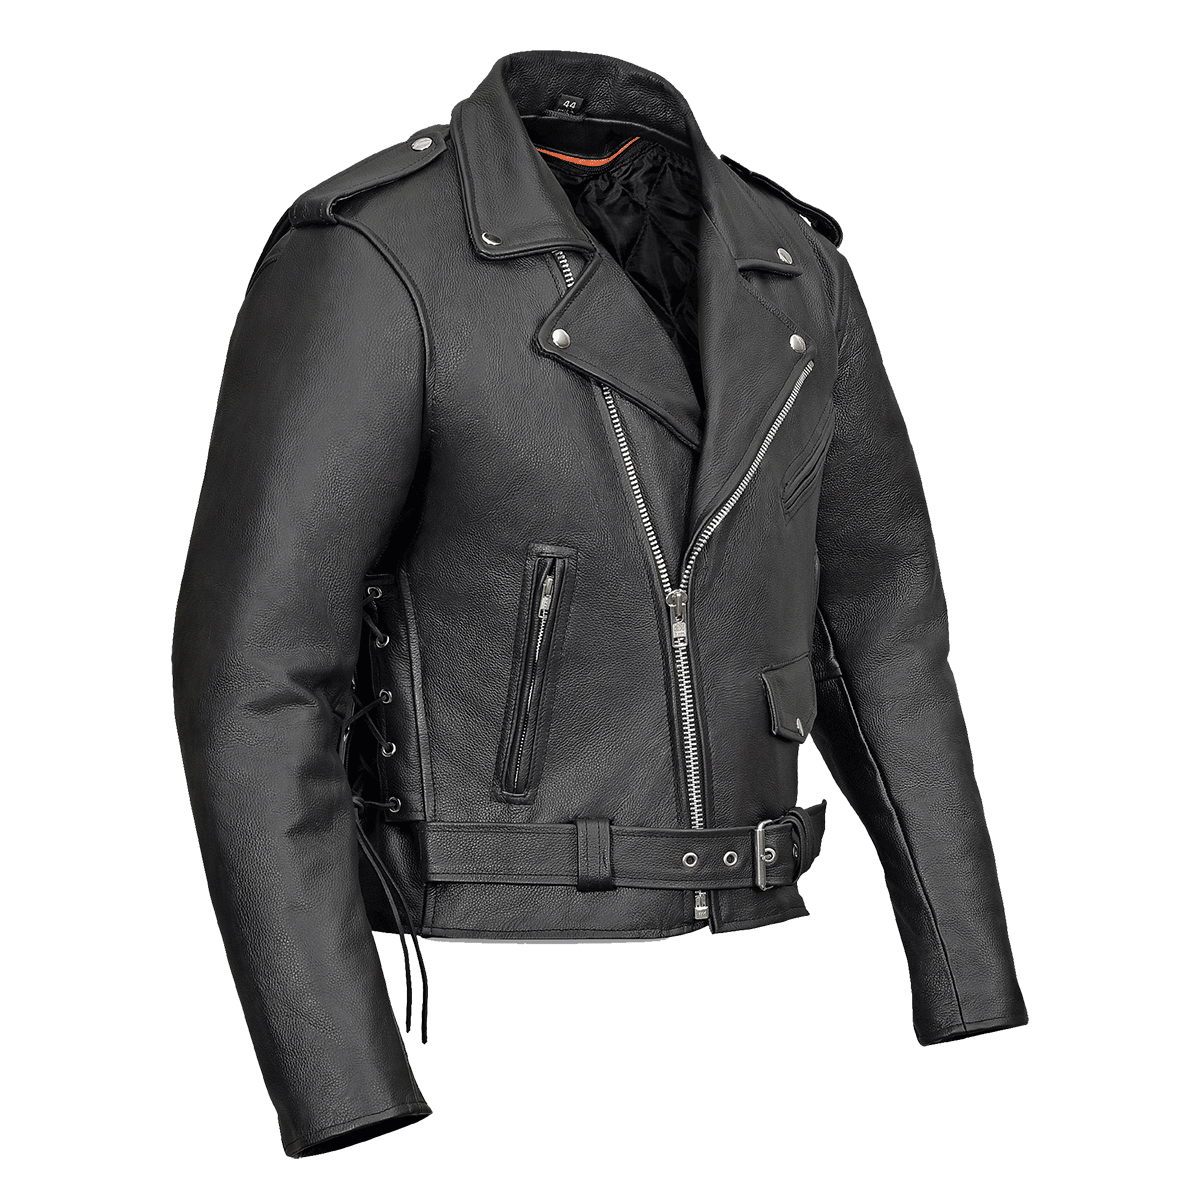 Vance Leather Men's Basic Classic Motorcycle Jacket with Lace Sides & Zip out Liner